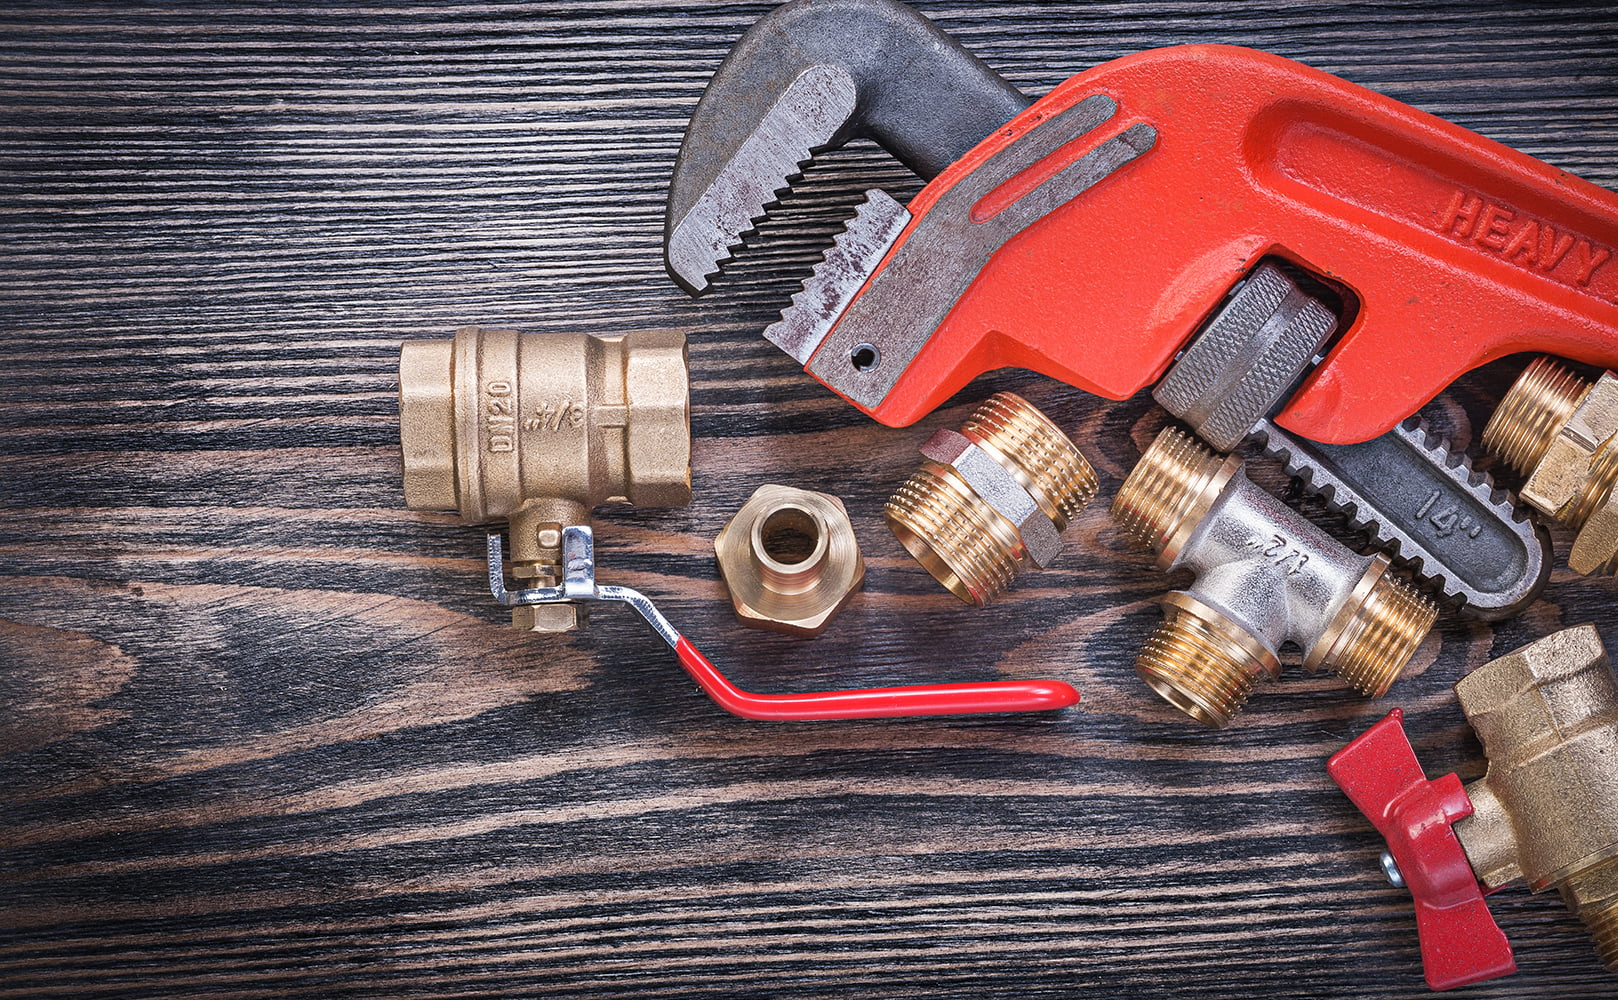 ball valve and other plumbing tools and supplies